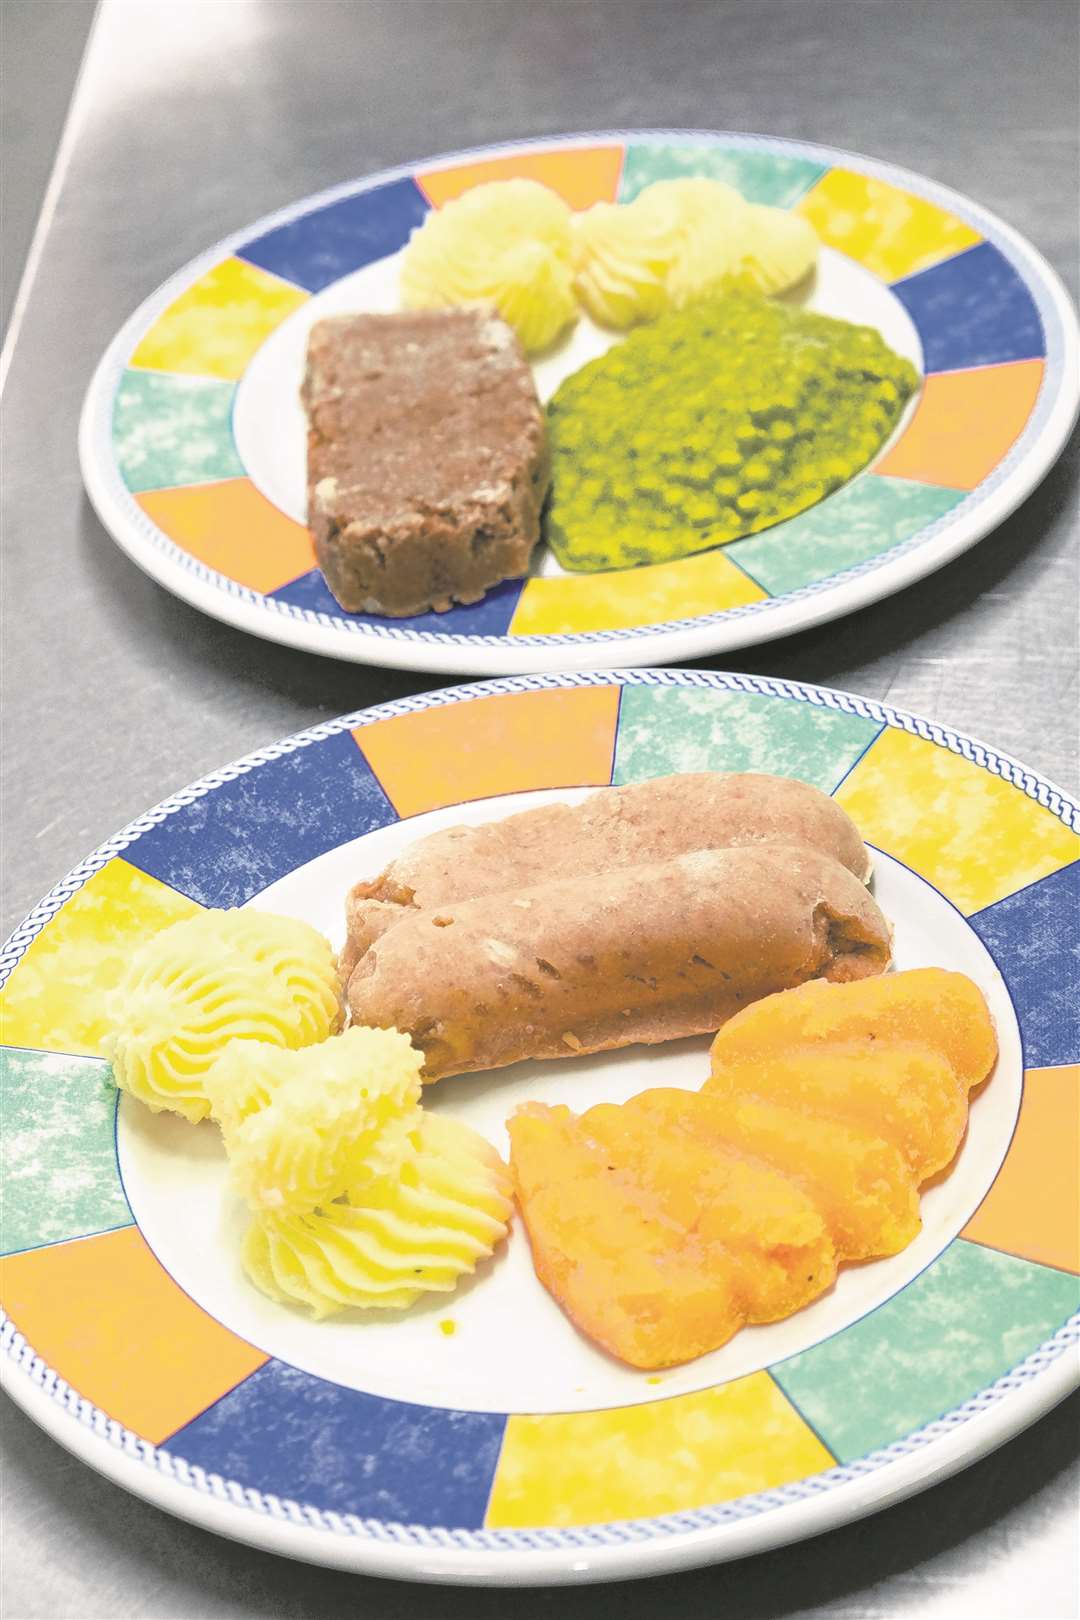 Pureed meals made back into the shape of the original product